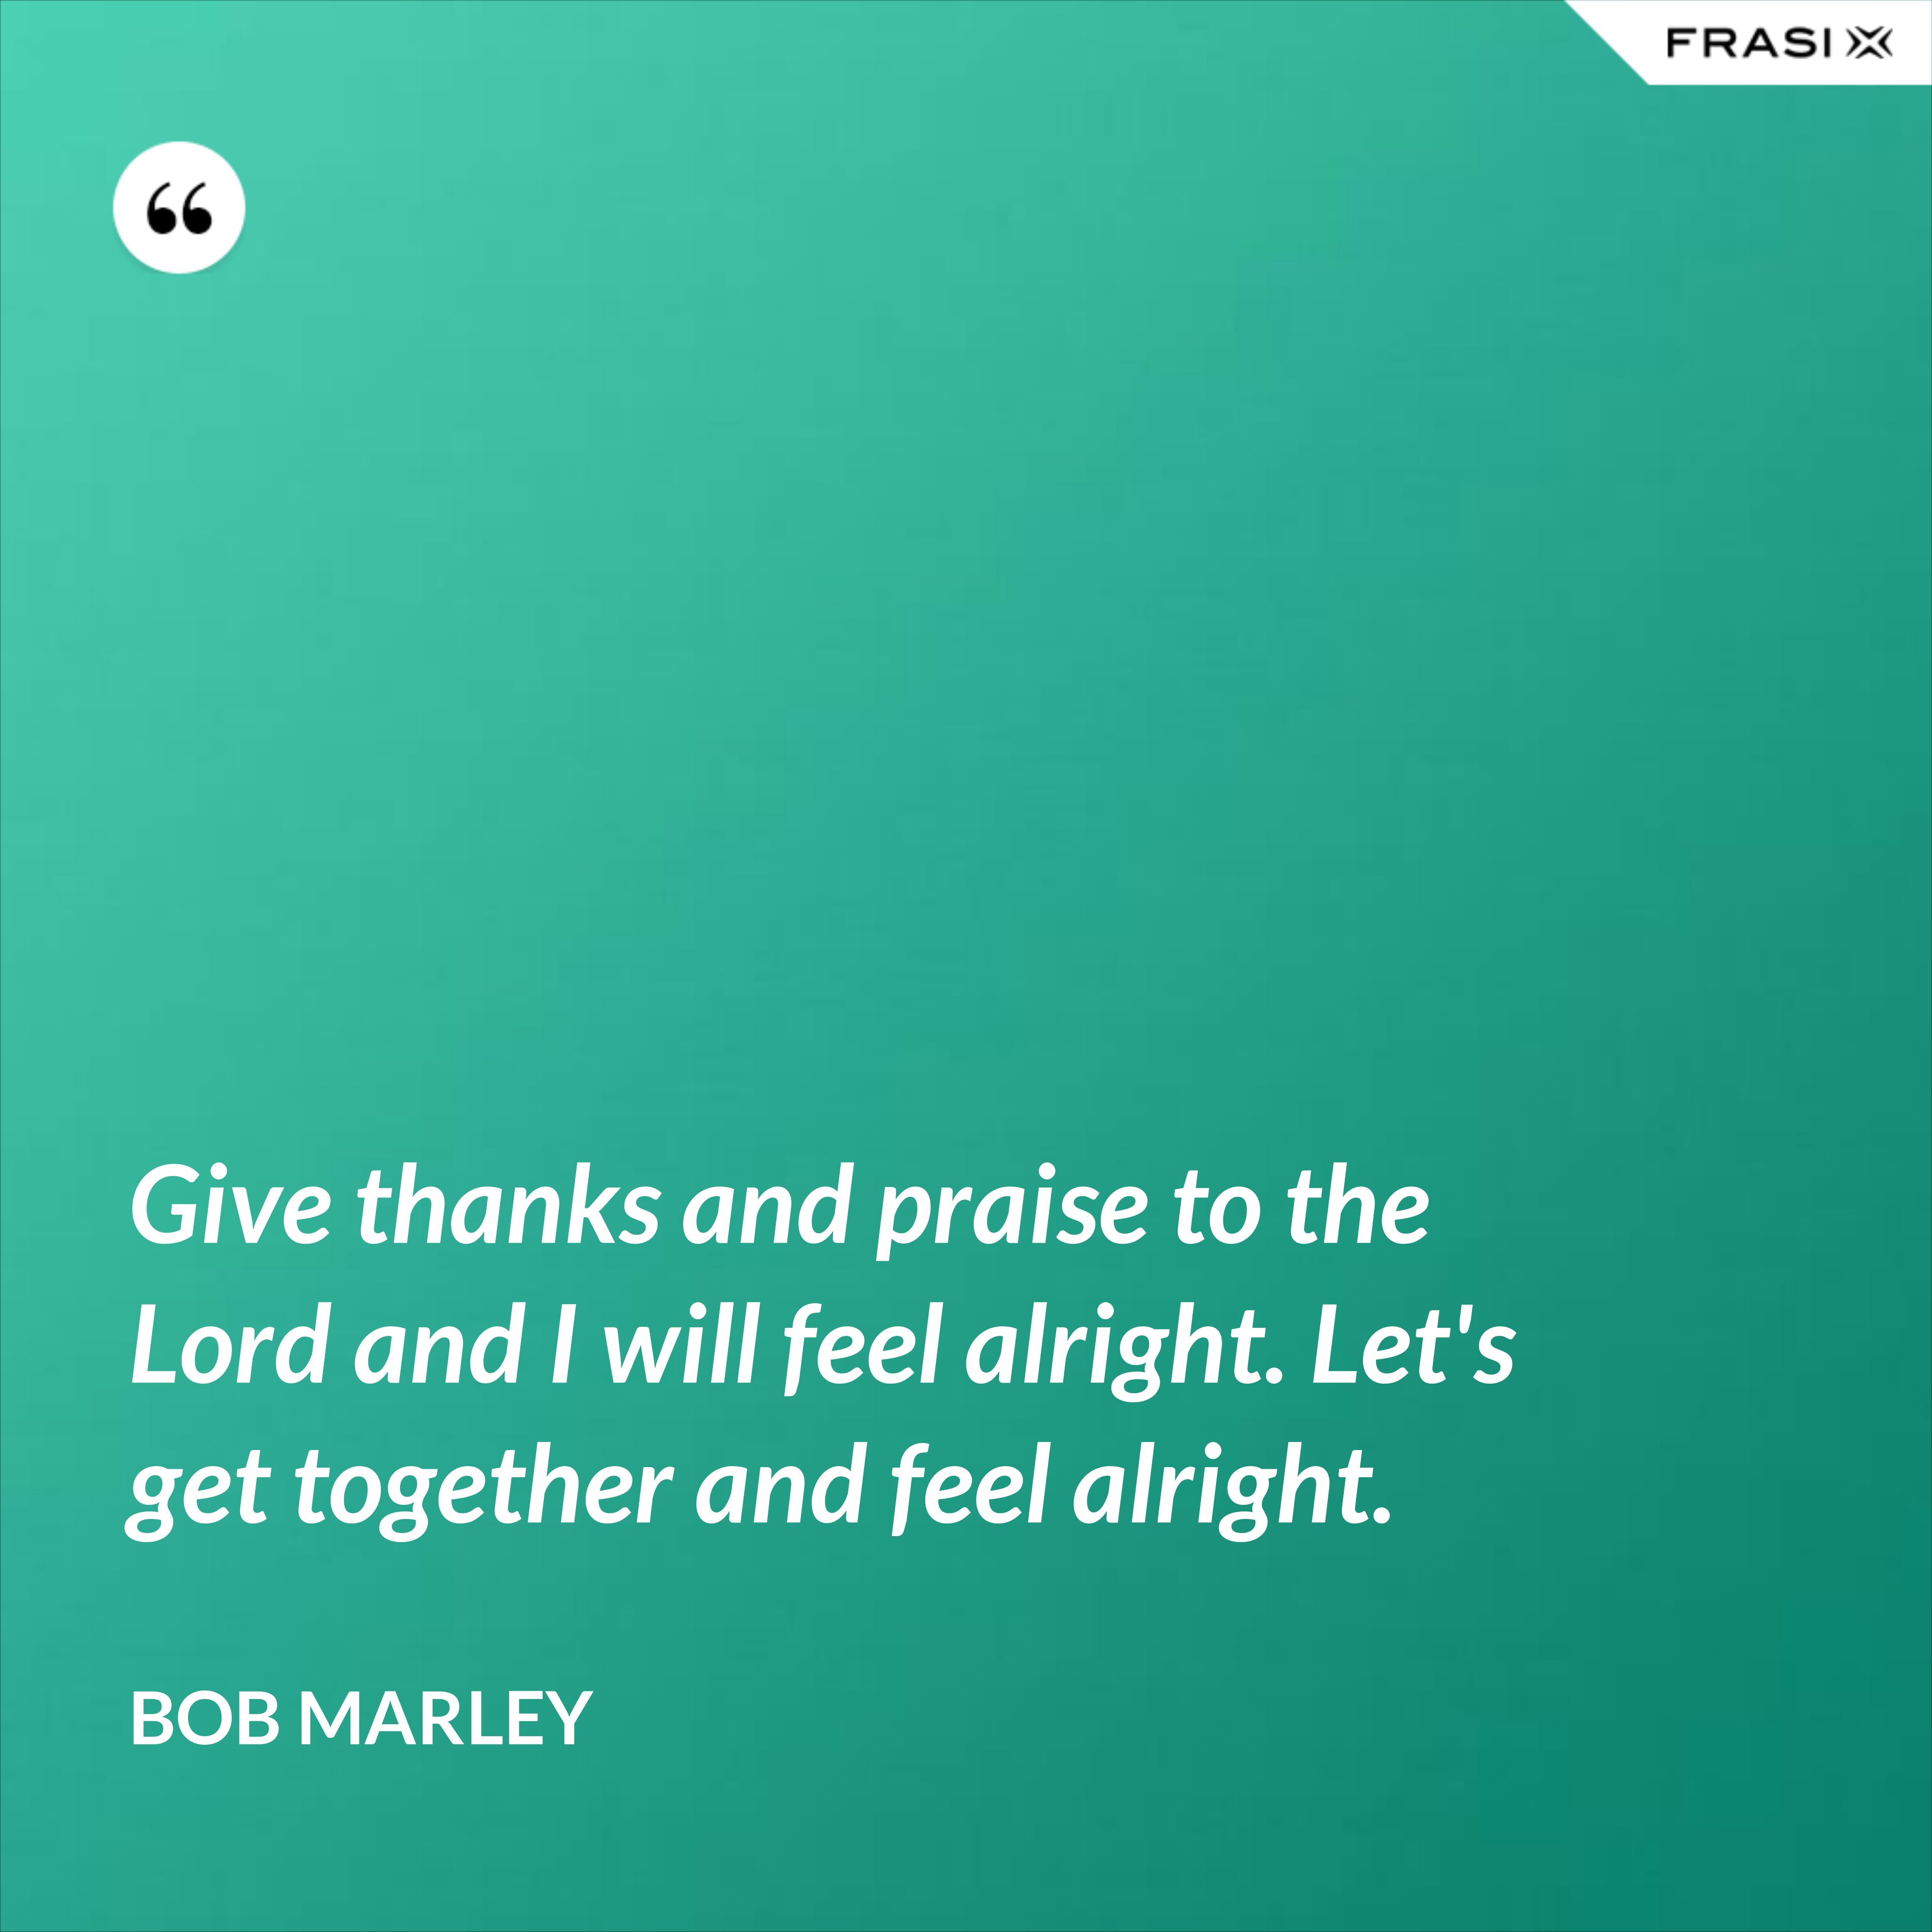 Give thanks and praise to the Lord and I will feel alright. Let's get together and feel alright. - Bob Marley